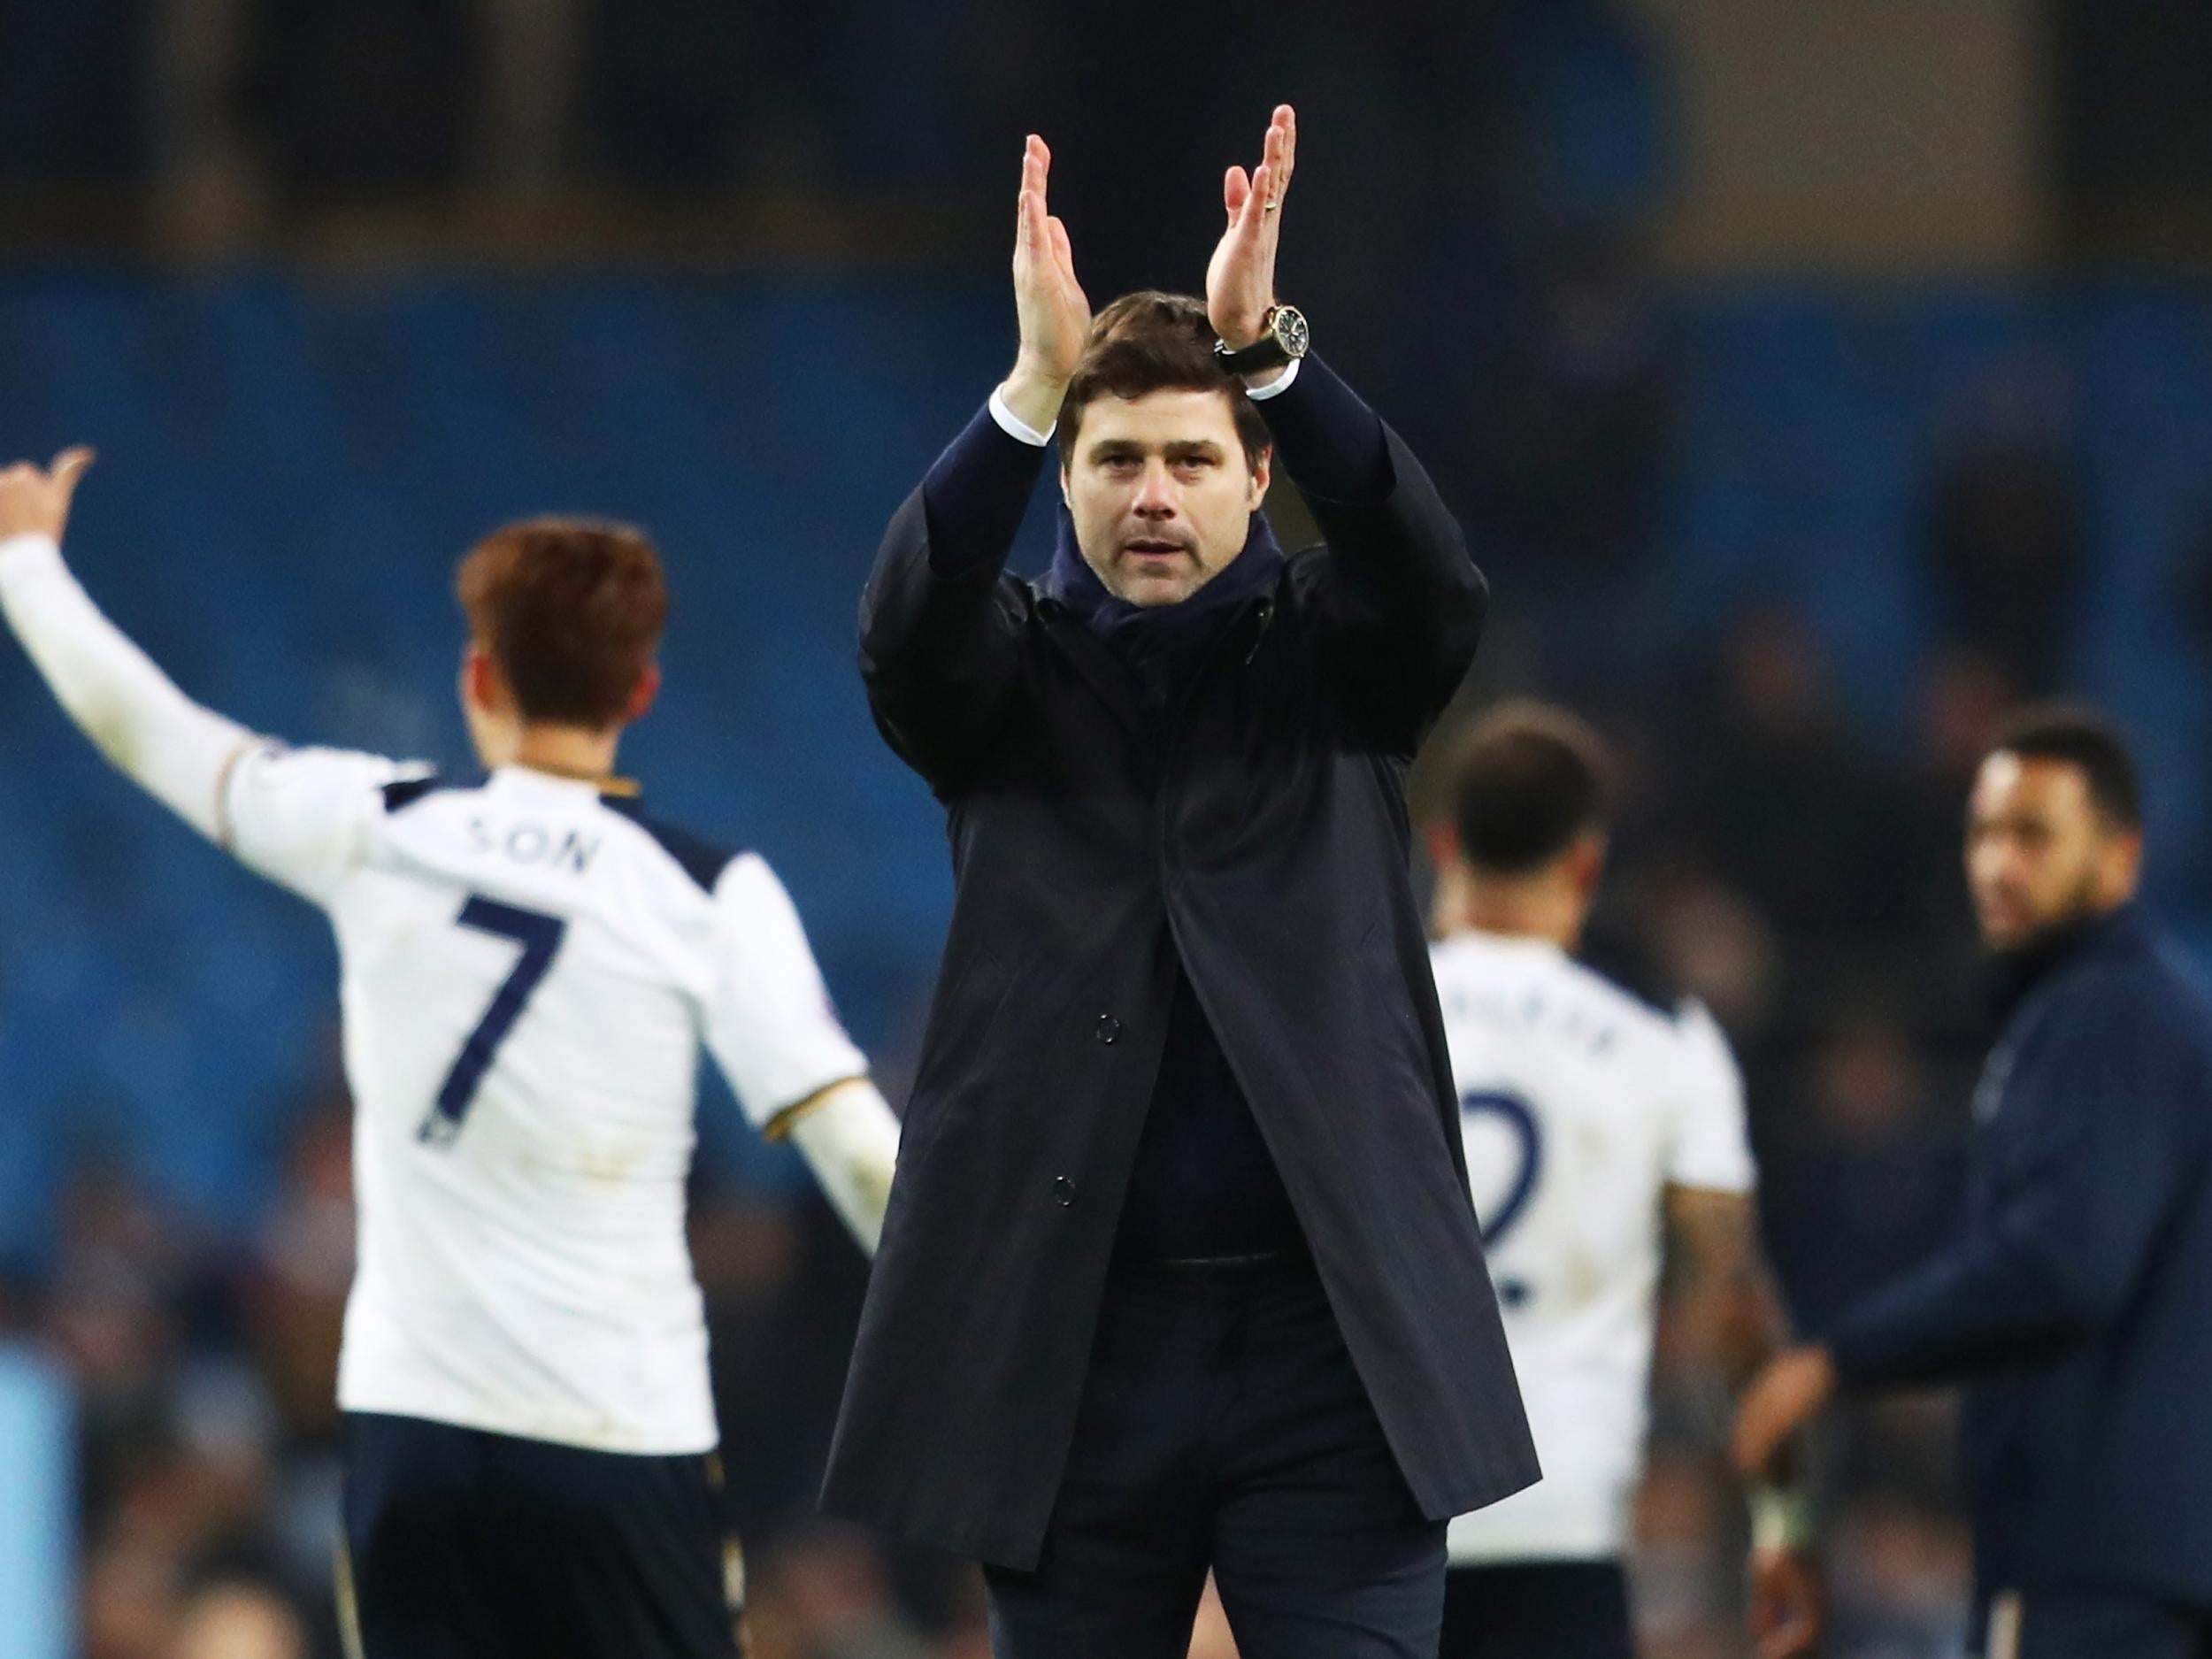 Pochettino will be happy with the point on his way back to London